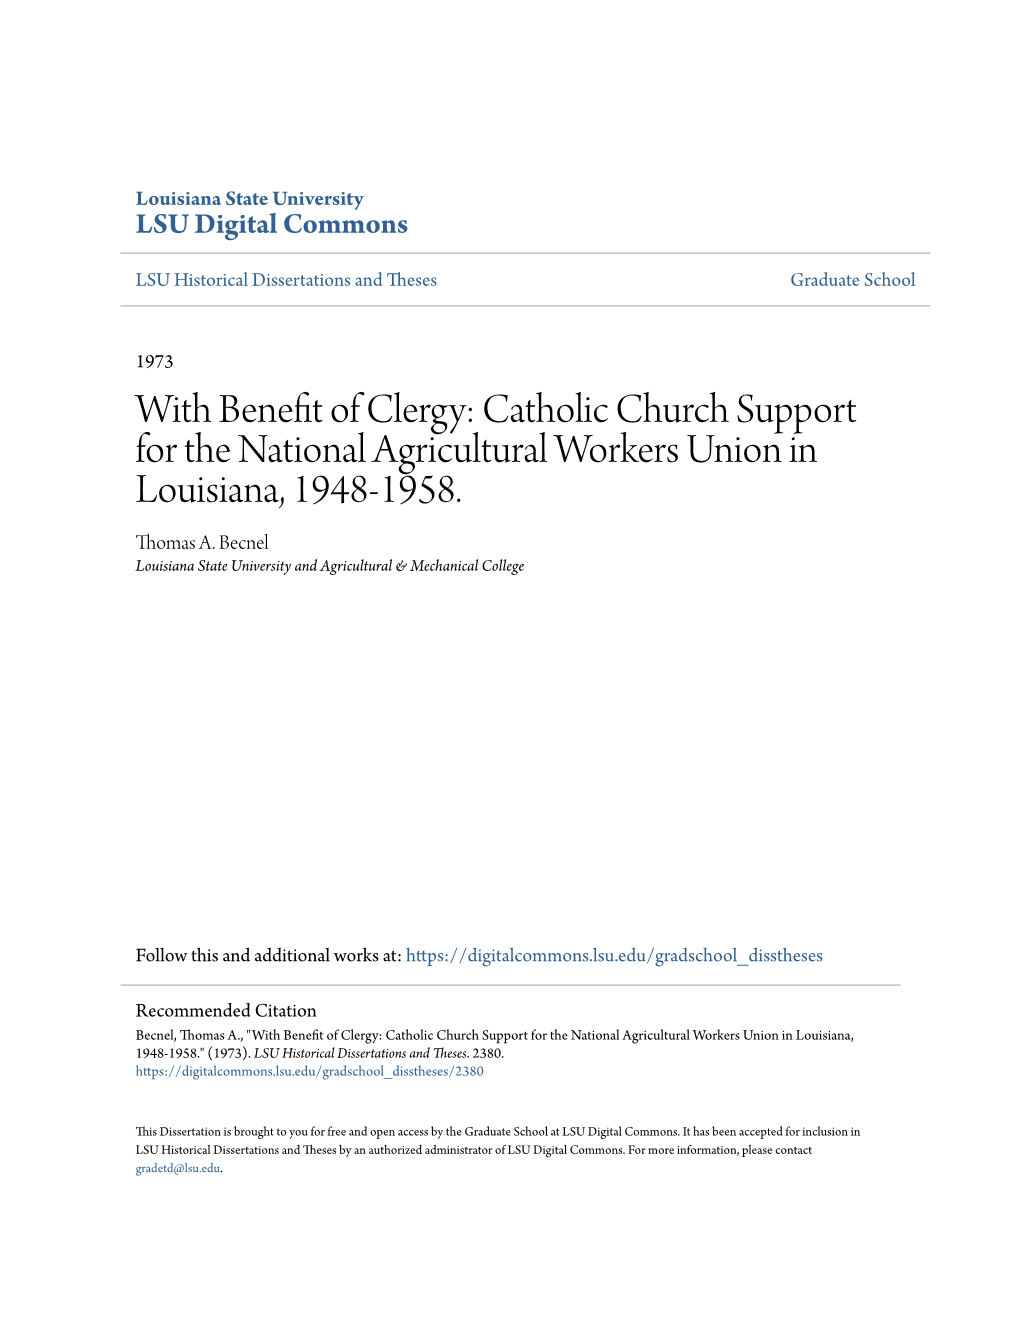 Catholic Church Support for the National Agricultural Workers Union in Louisiana, 1948-1958